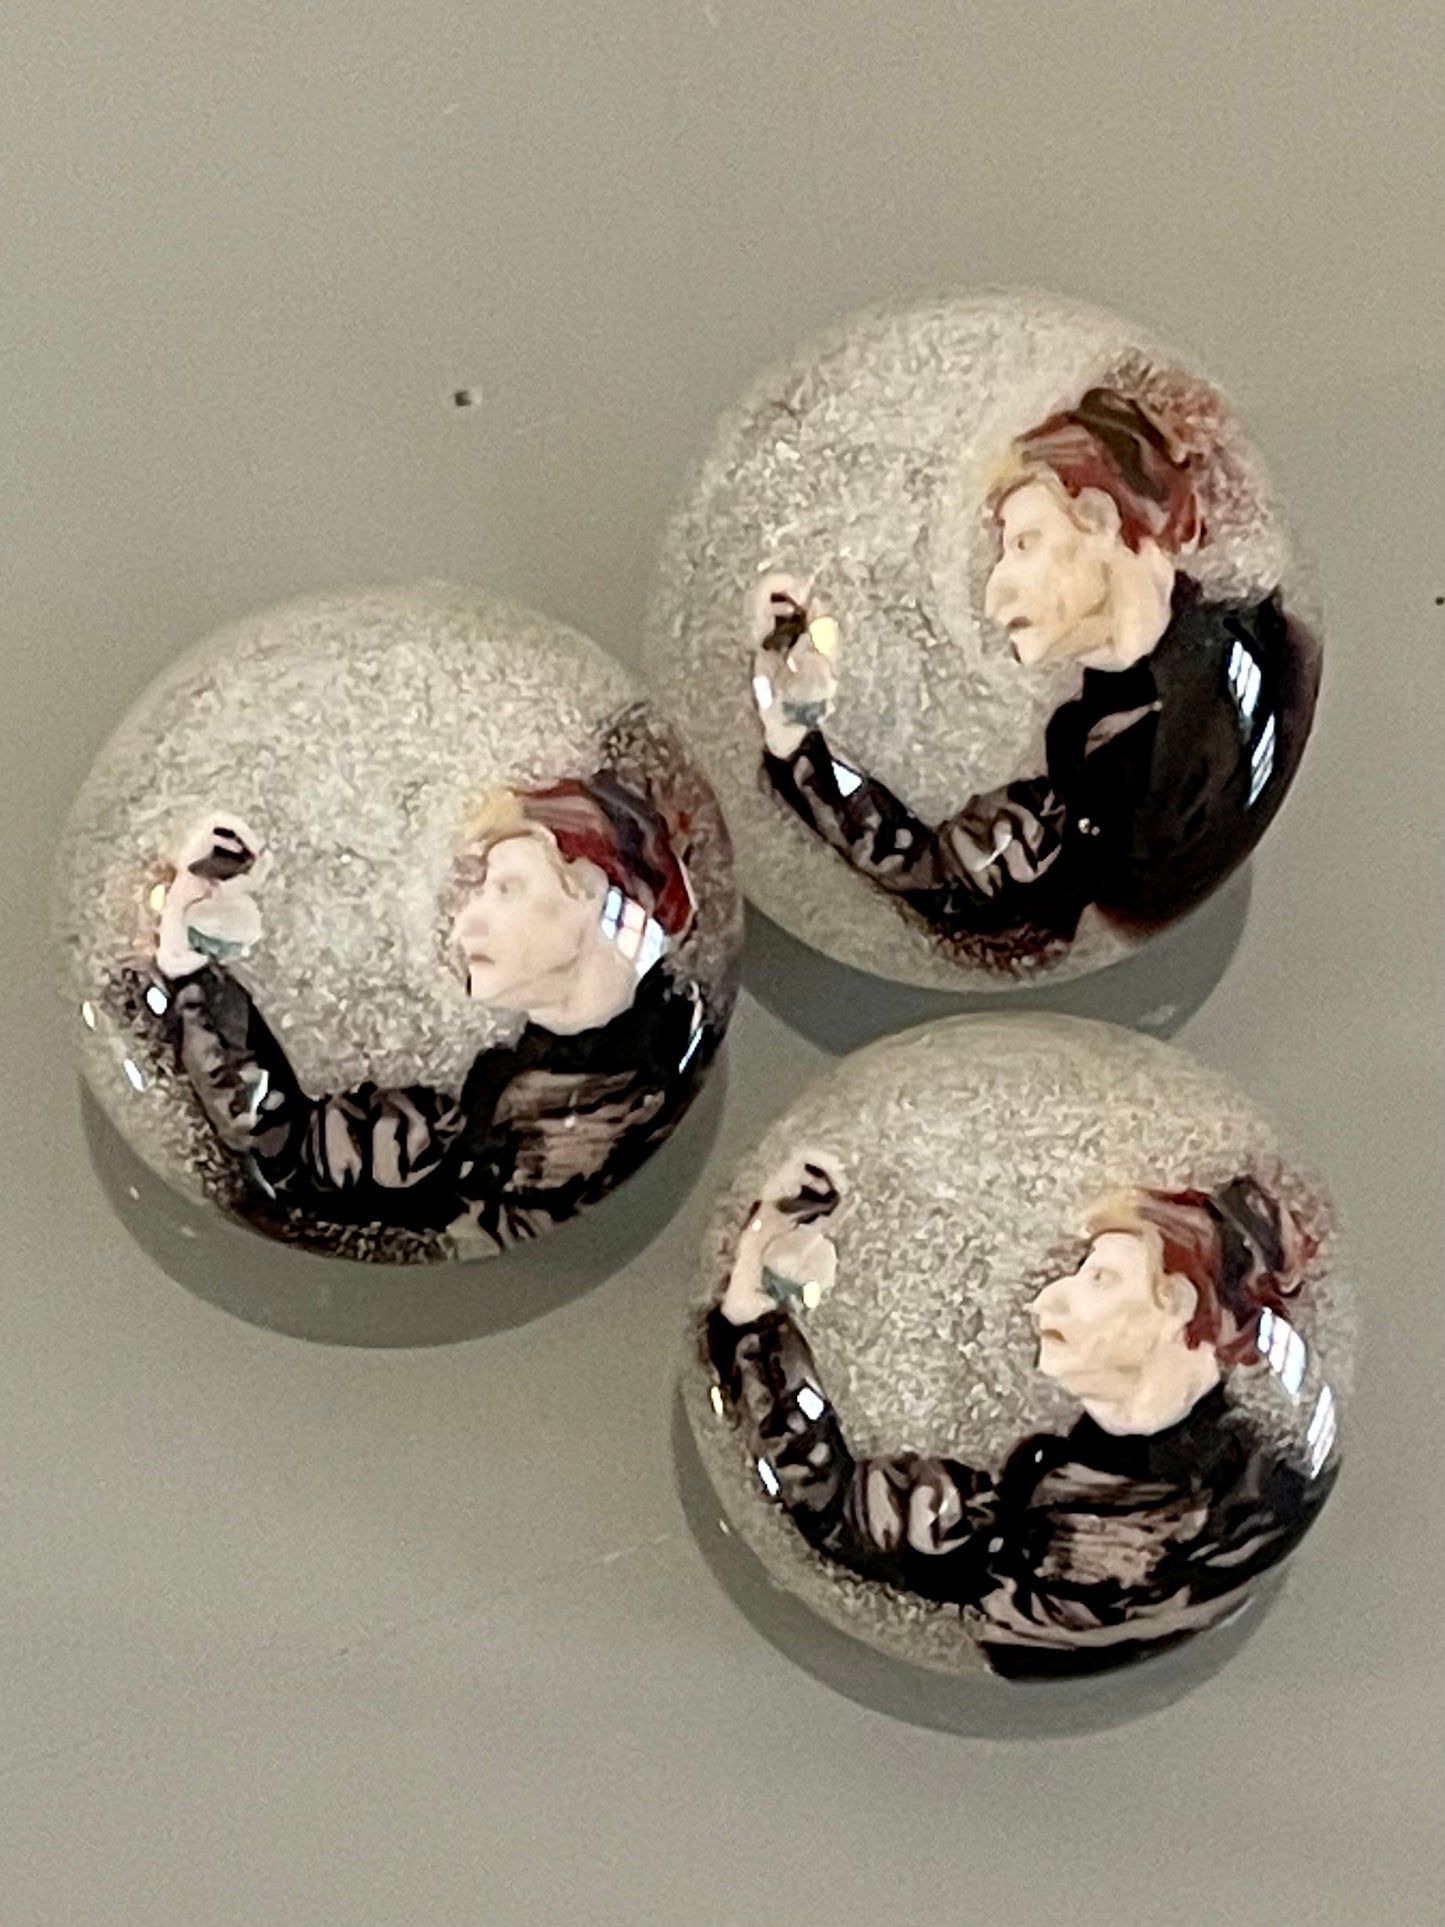 Madame Curie Button 25mm